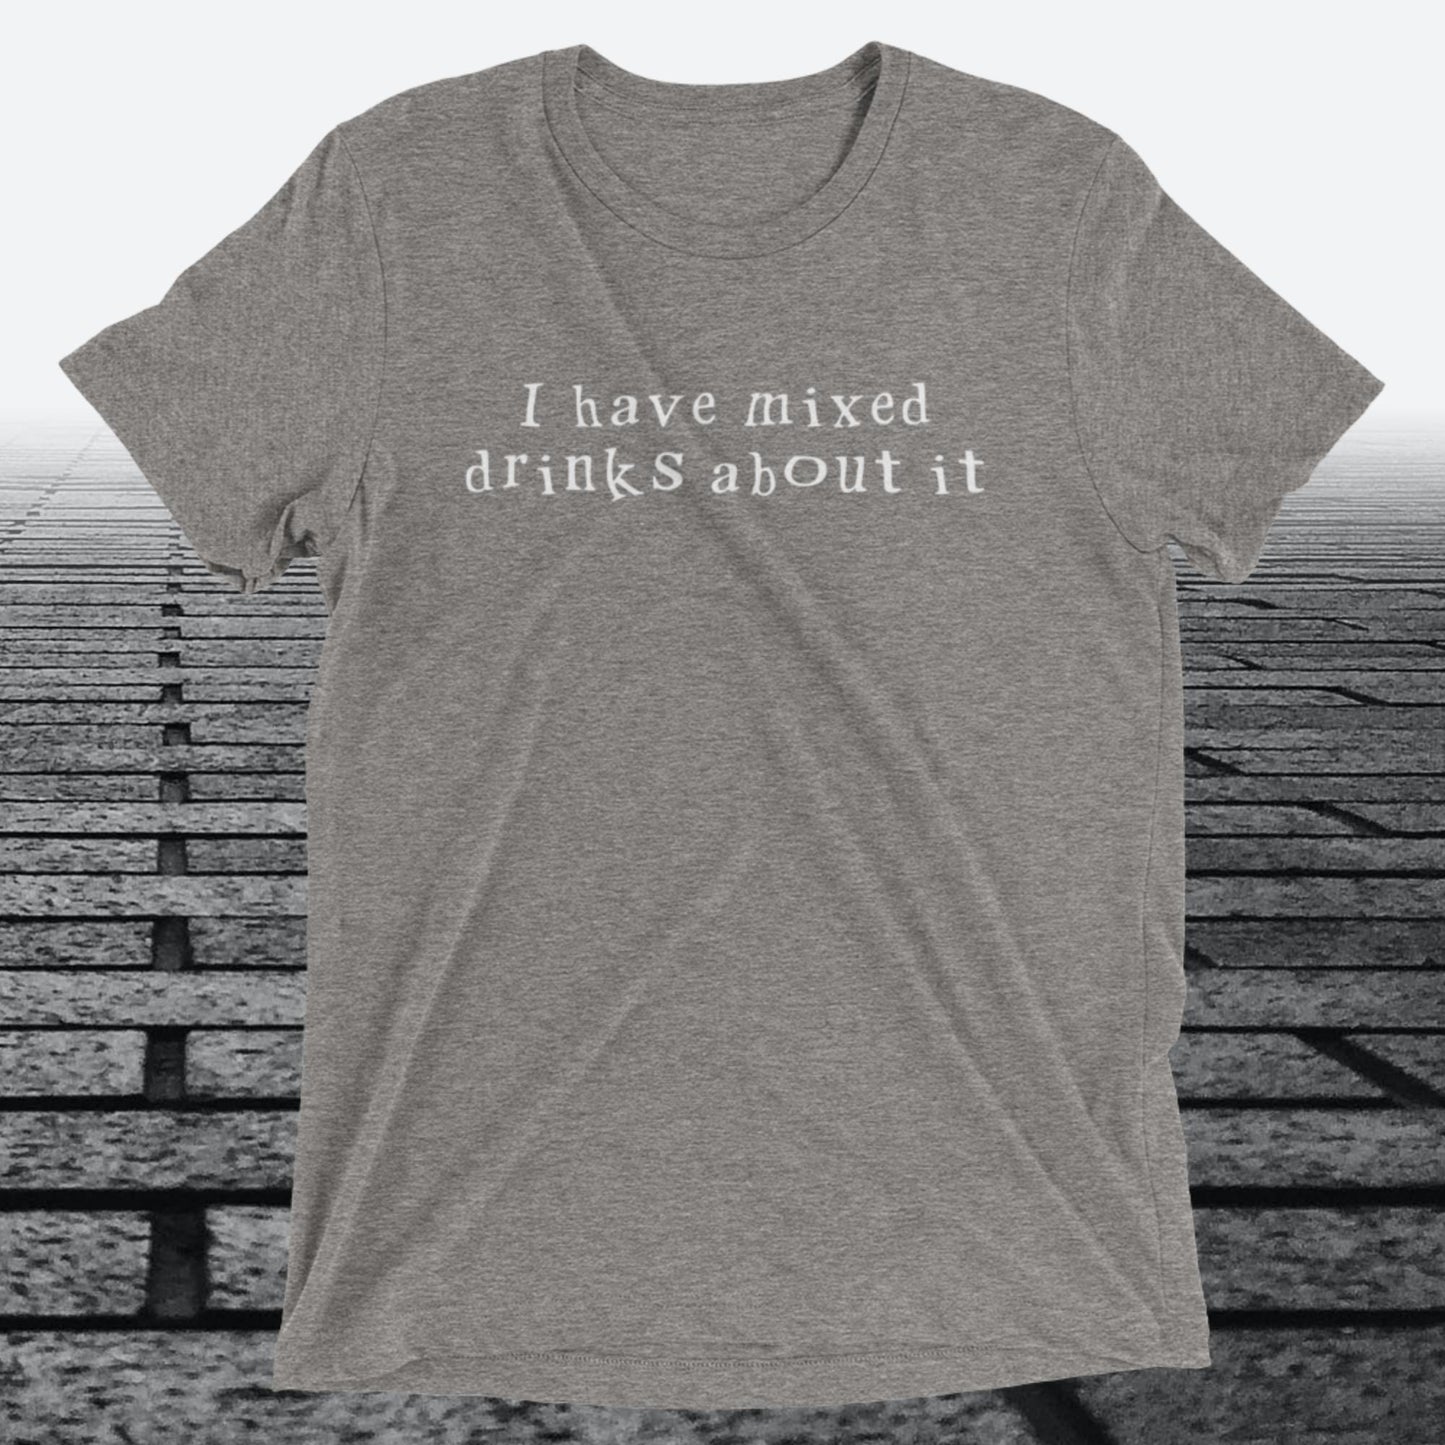 I have mixed drinks about it, Triblend T-shirt